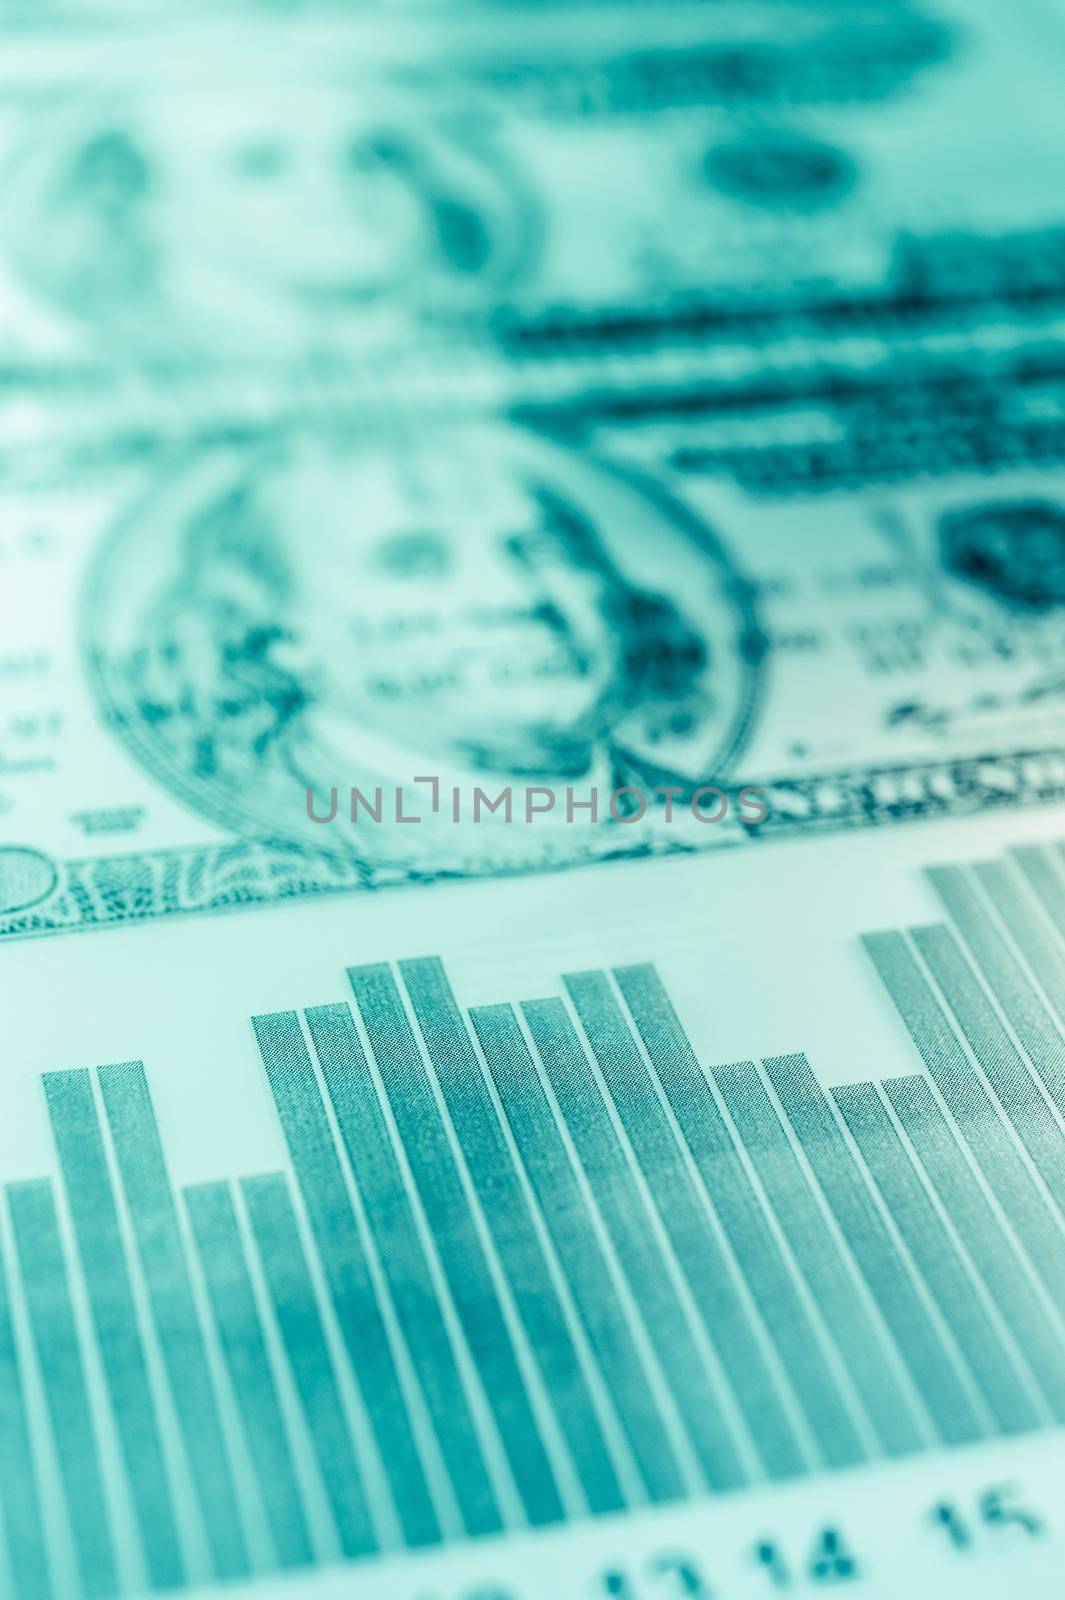 Double exposure Stock market display or forex trading graph and candlestick chart on dollars banknote. Economy trends background for business idea and all art work design. Abstract finance background.